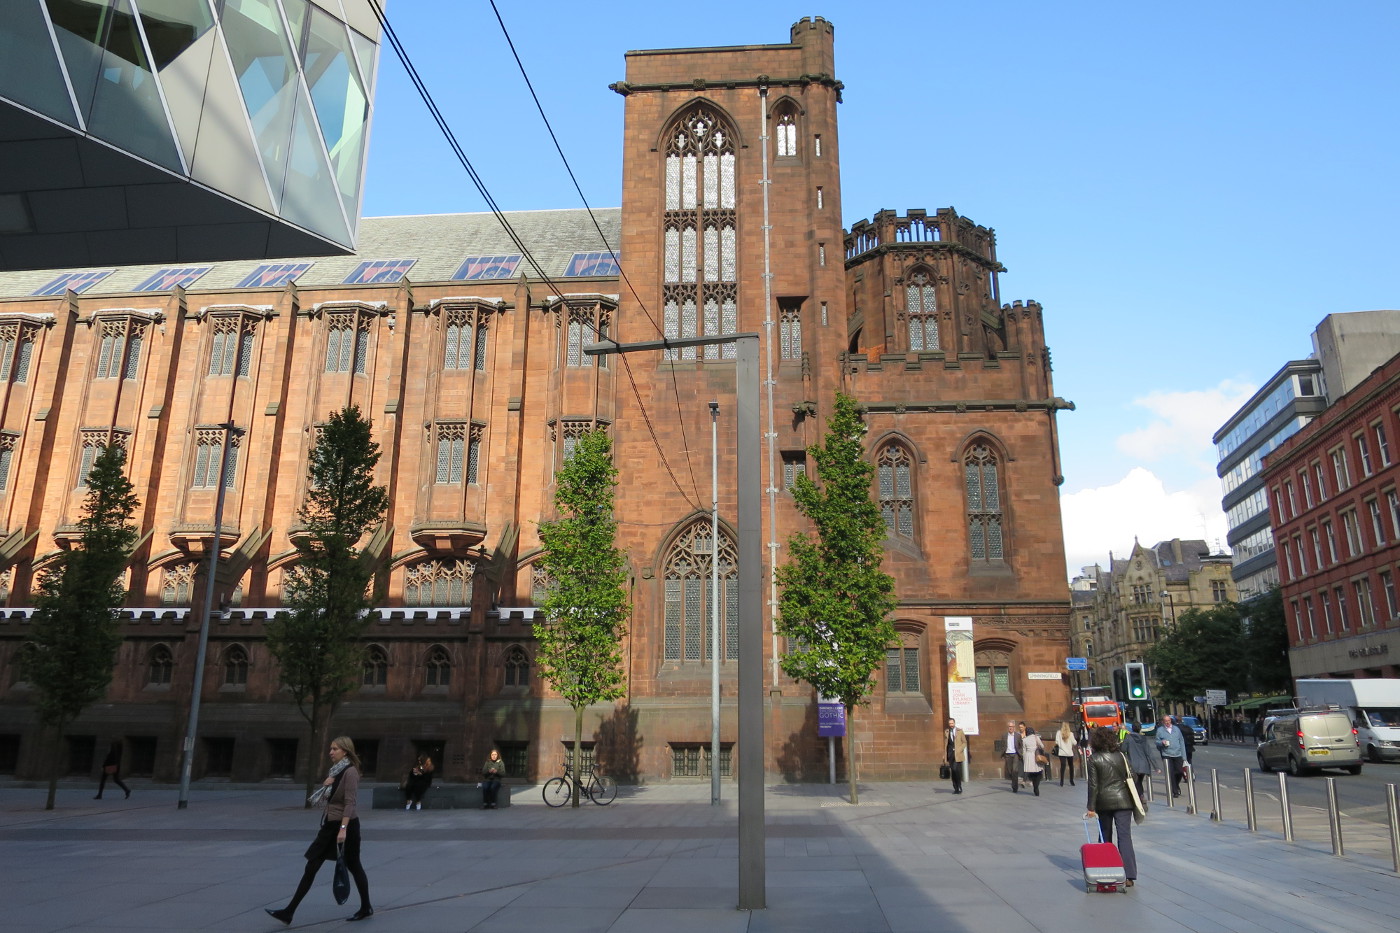 John Rylands Library. Image by James Smart / Lonely Planet